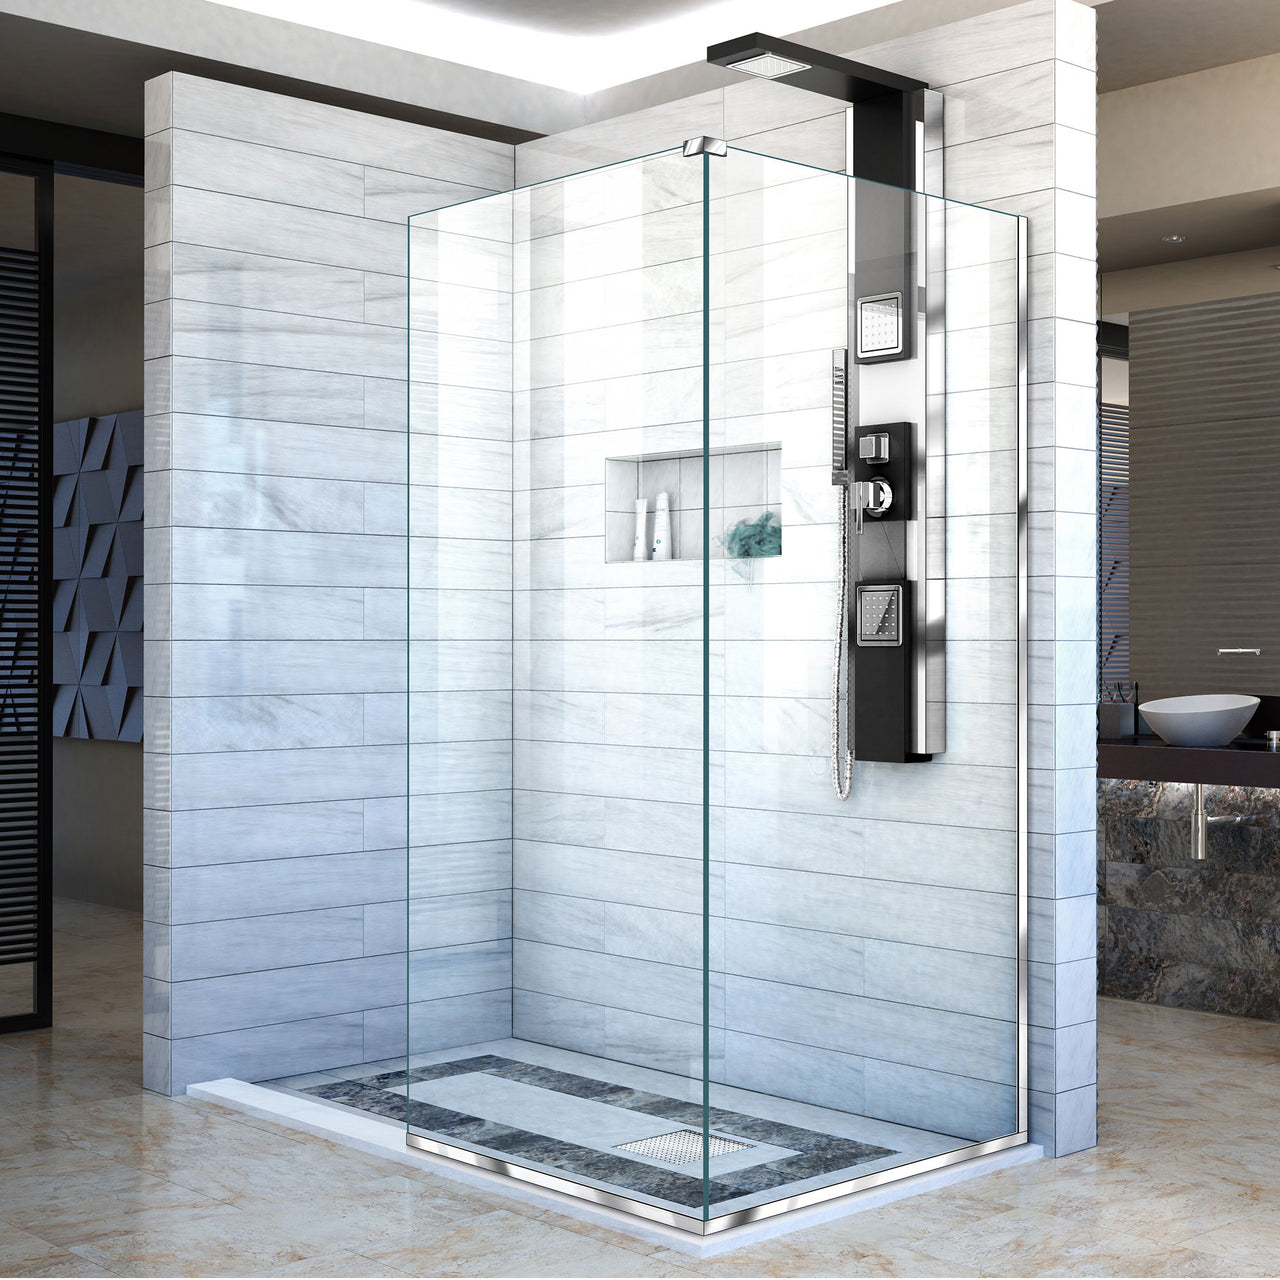 DreamLine Linea Two Adjacent Frameless Shower Screens 34 in. and 30 in. W x 72 in. H, Open Entry Design - BNGBath